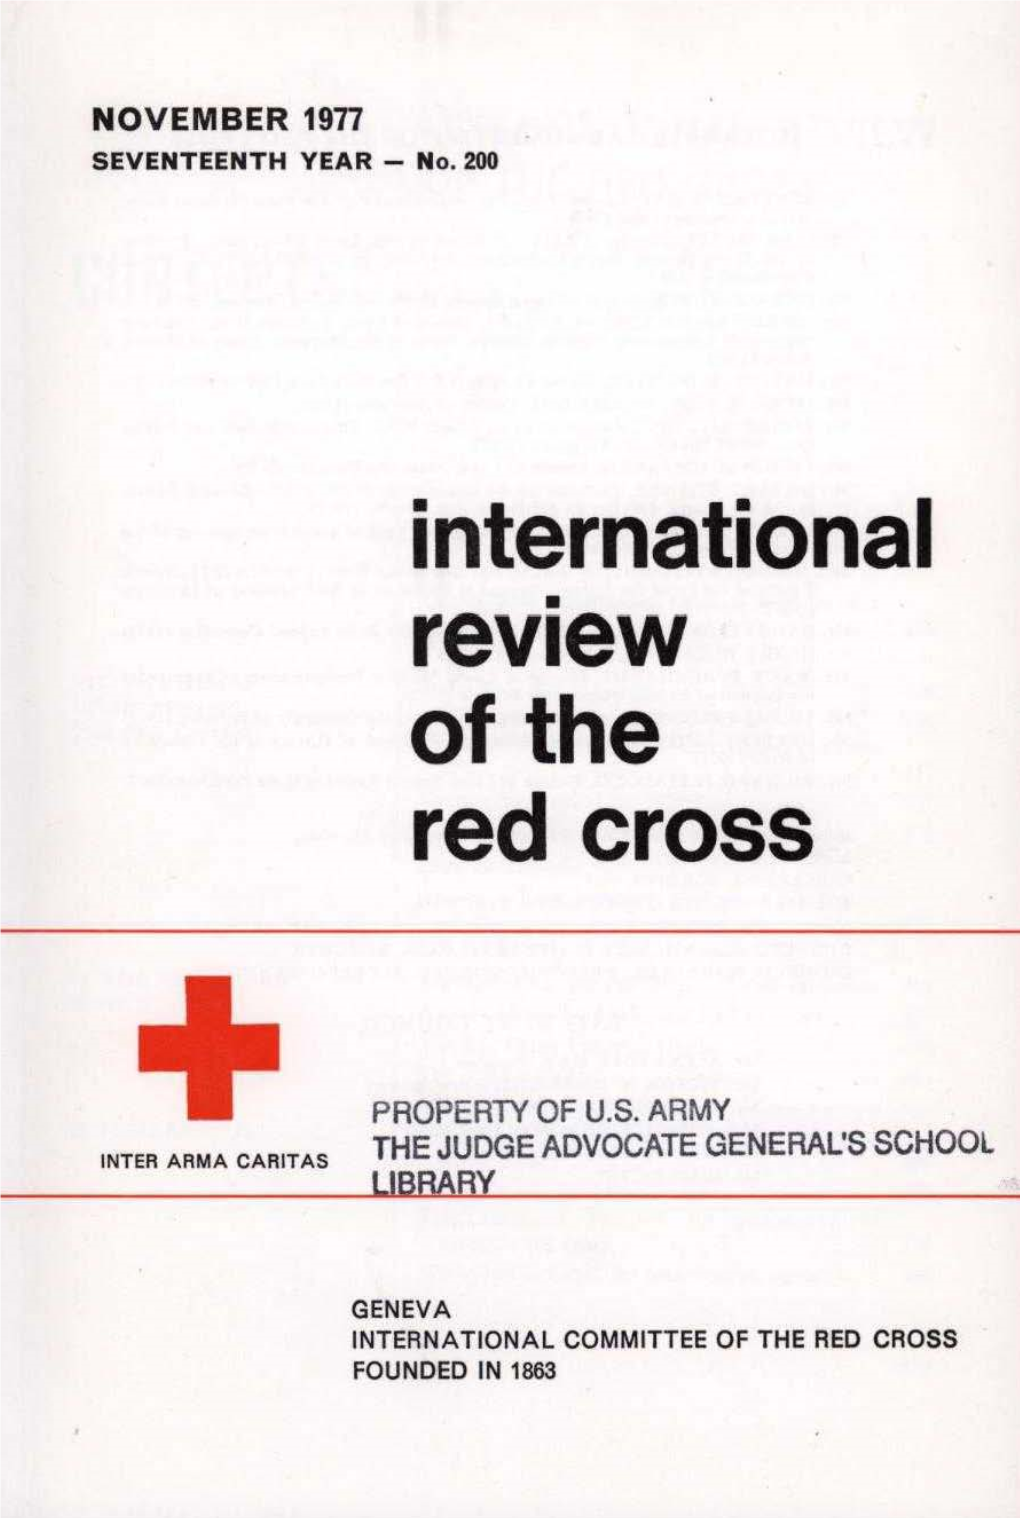 International Review of the Red Cross, November 1977